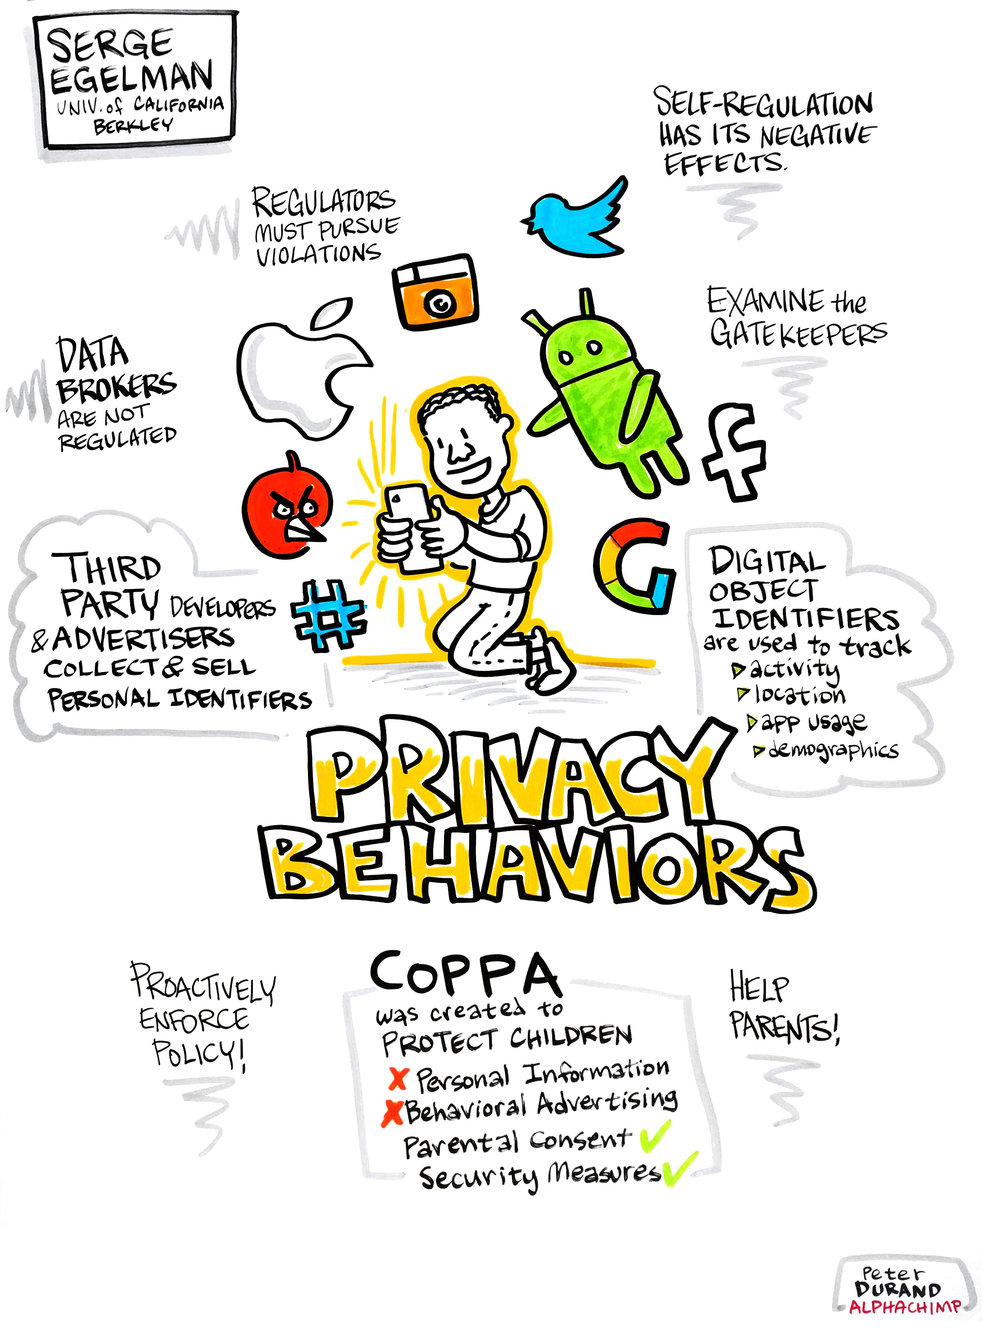 Won’t Somebody Think of the Children?! Examining Privacy Behaviors of Mobile Apps at Scale